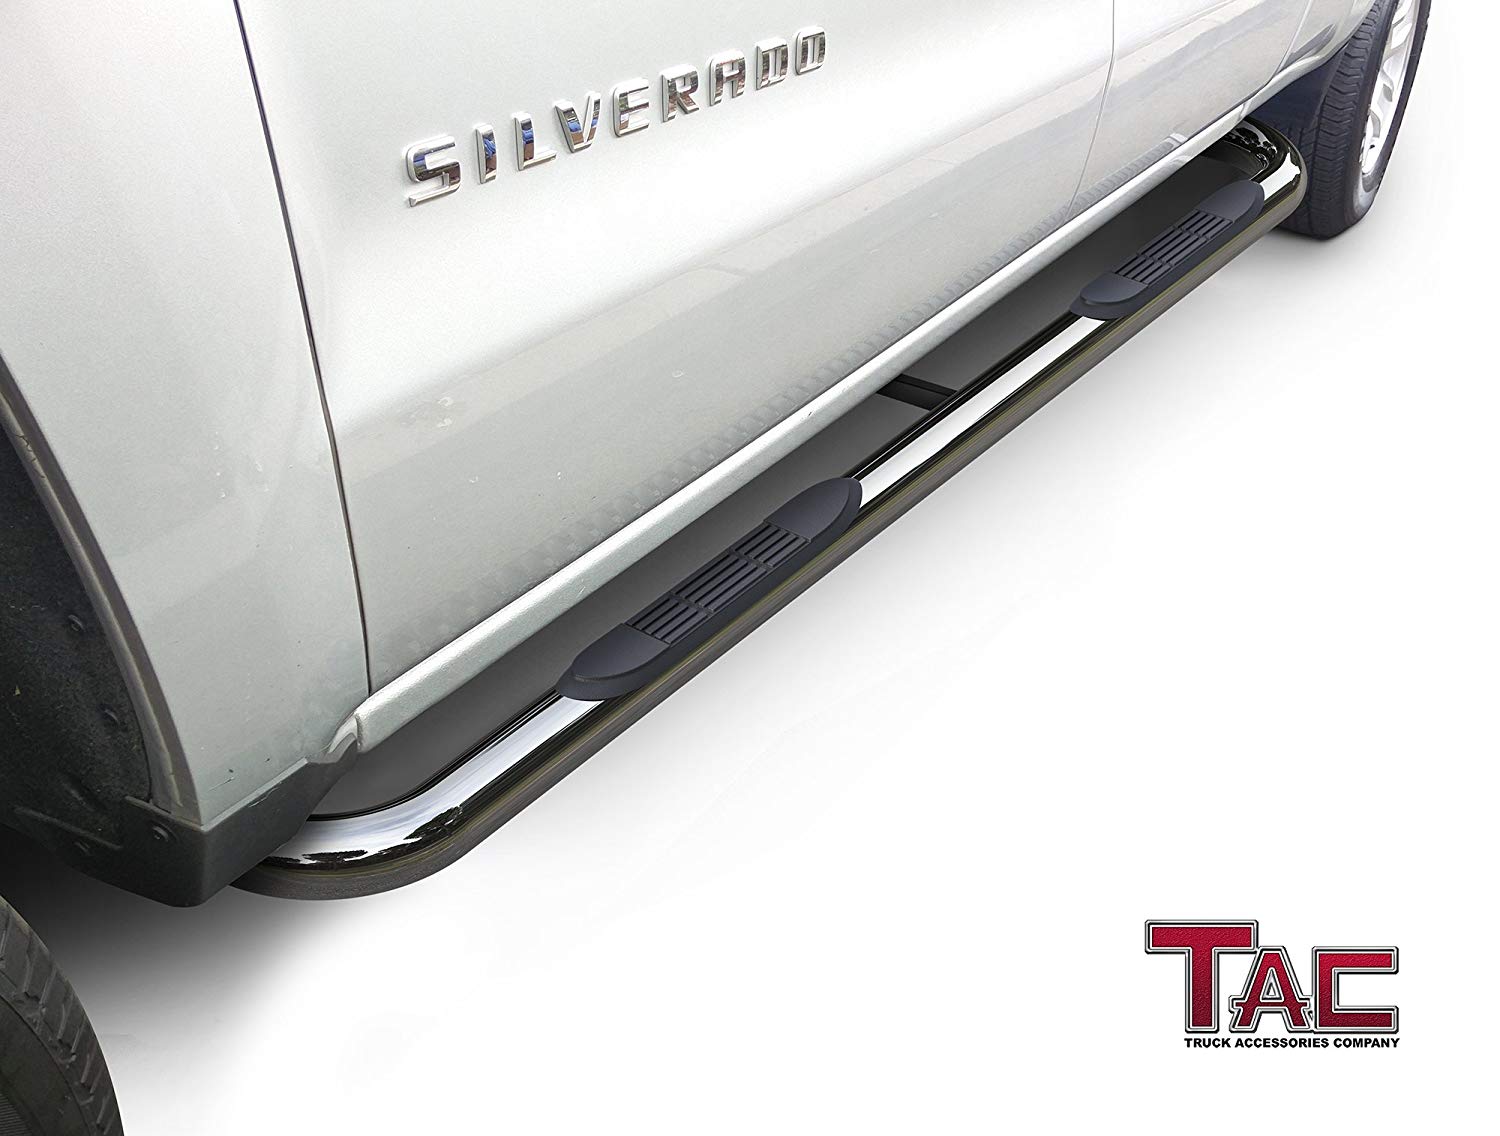 TAC Stainless Steel 3" Side Steps For 2001-2018 Chevy Silverado/GMC Sierra 1500 Crew Cab (Excl. C/K "Classic") / 2001-2019 Chevy Silverado/GMC Sierra 2500/3500 Crew Cab (Excl. C/K "Classic") Truck | Running Boards | Nerf Bars | Side Bars - 0